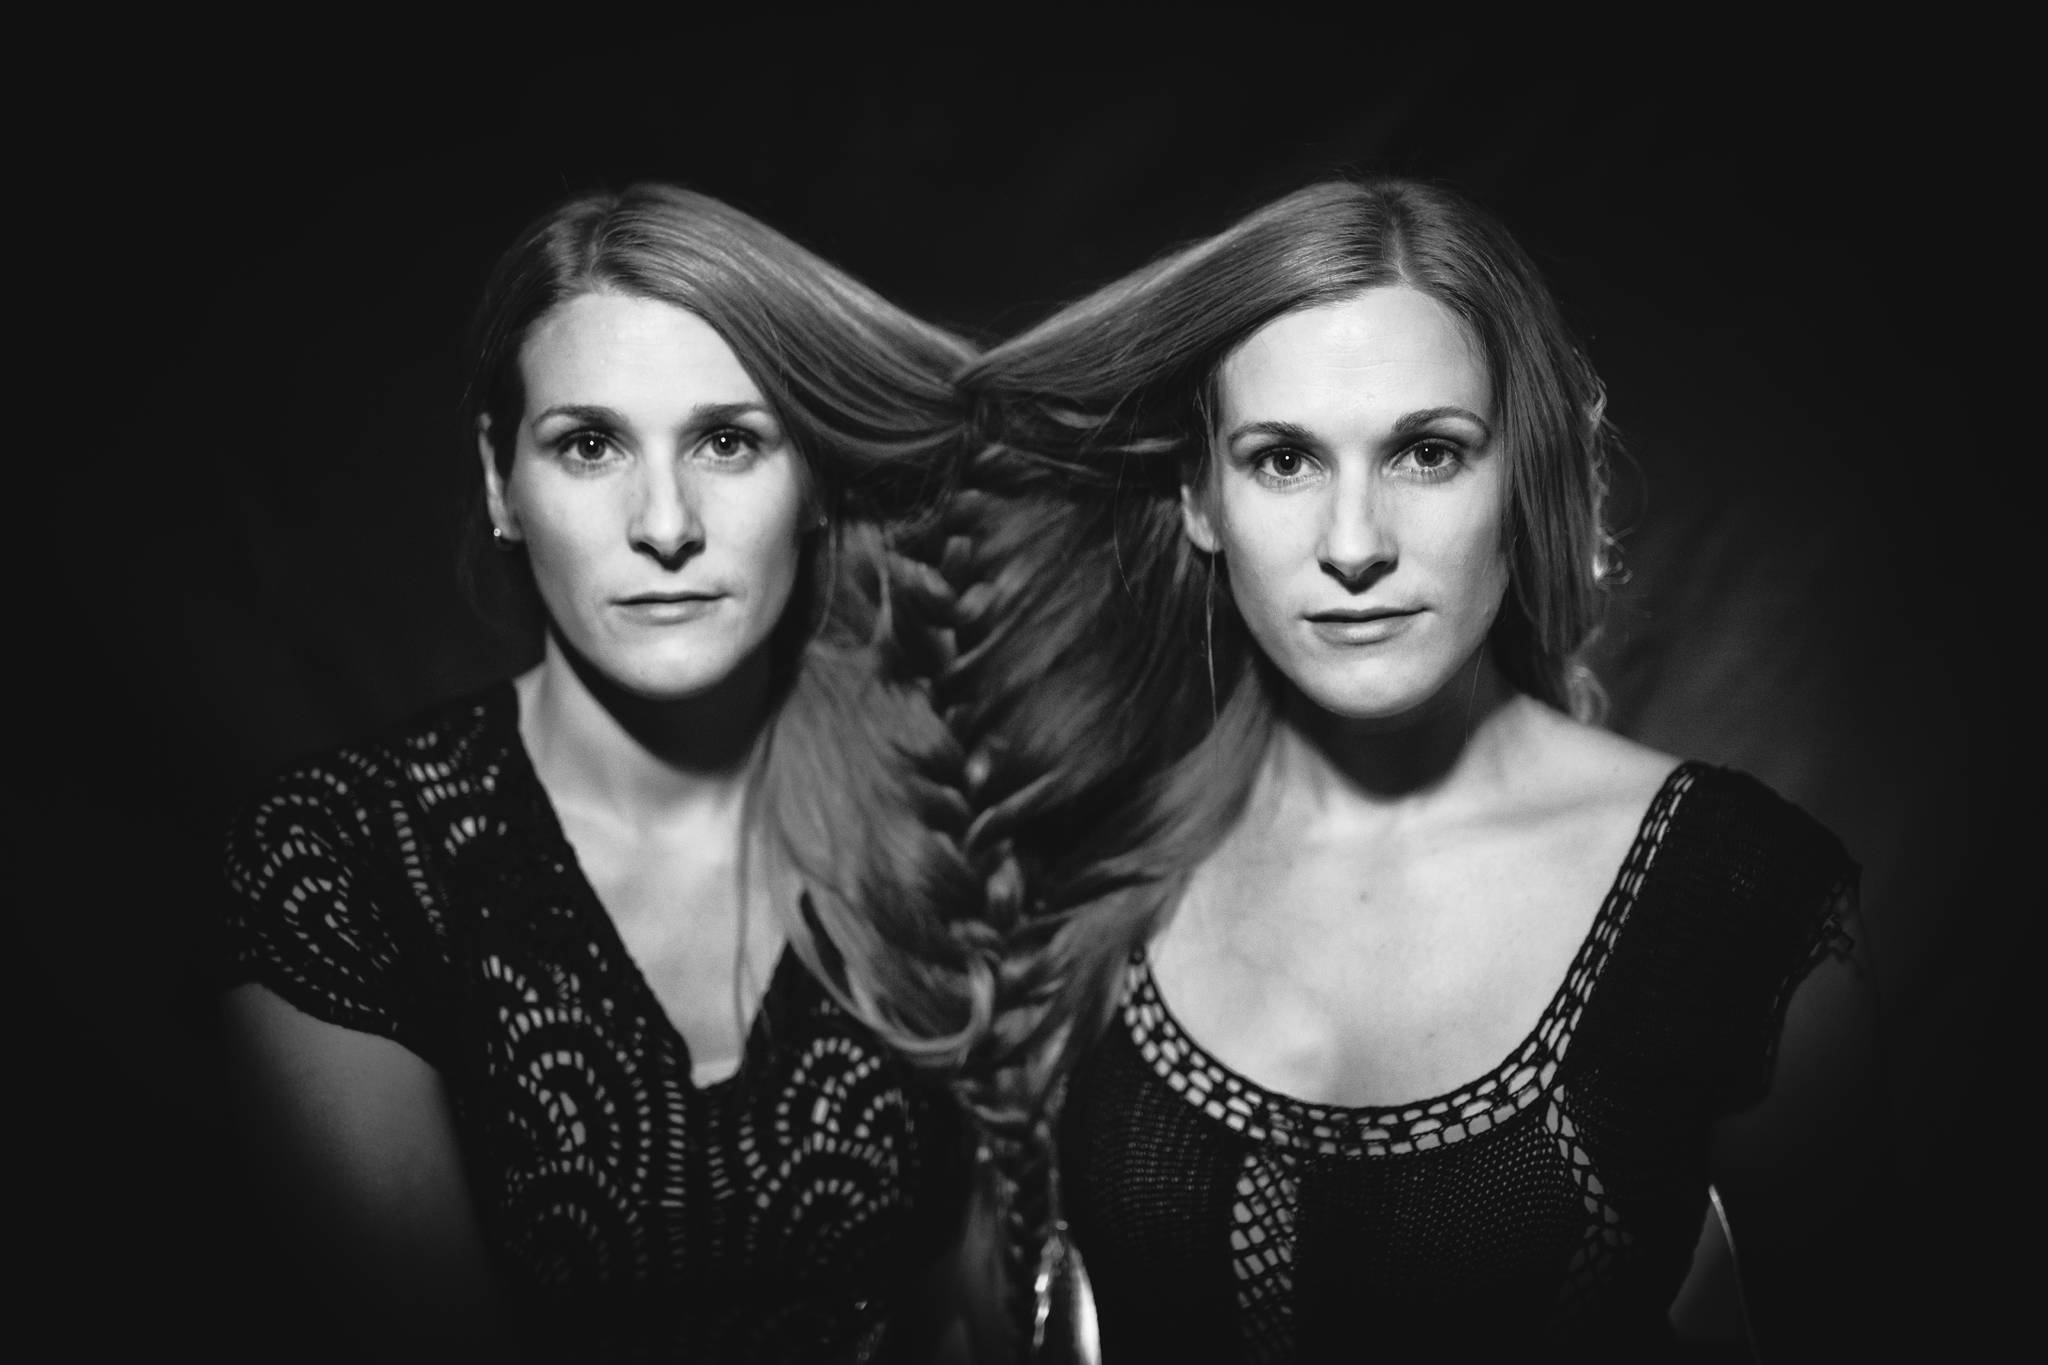 <span class="neFMT neFMT_PhotoCredit">Photo by Jessie McCall</span>                                The Shook Twins, Katelyn, left, and Laurie Shook.